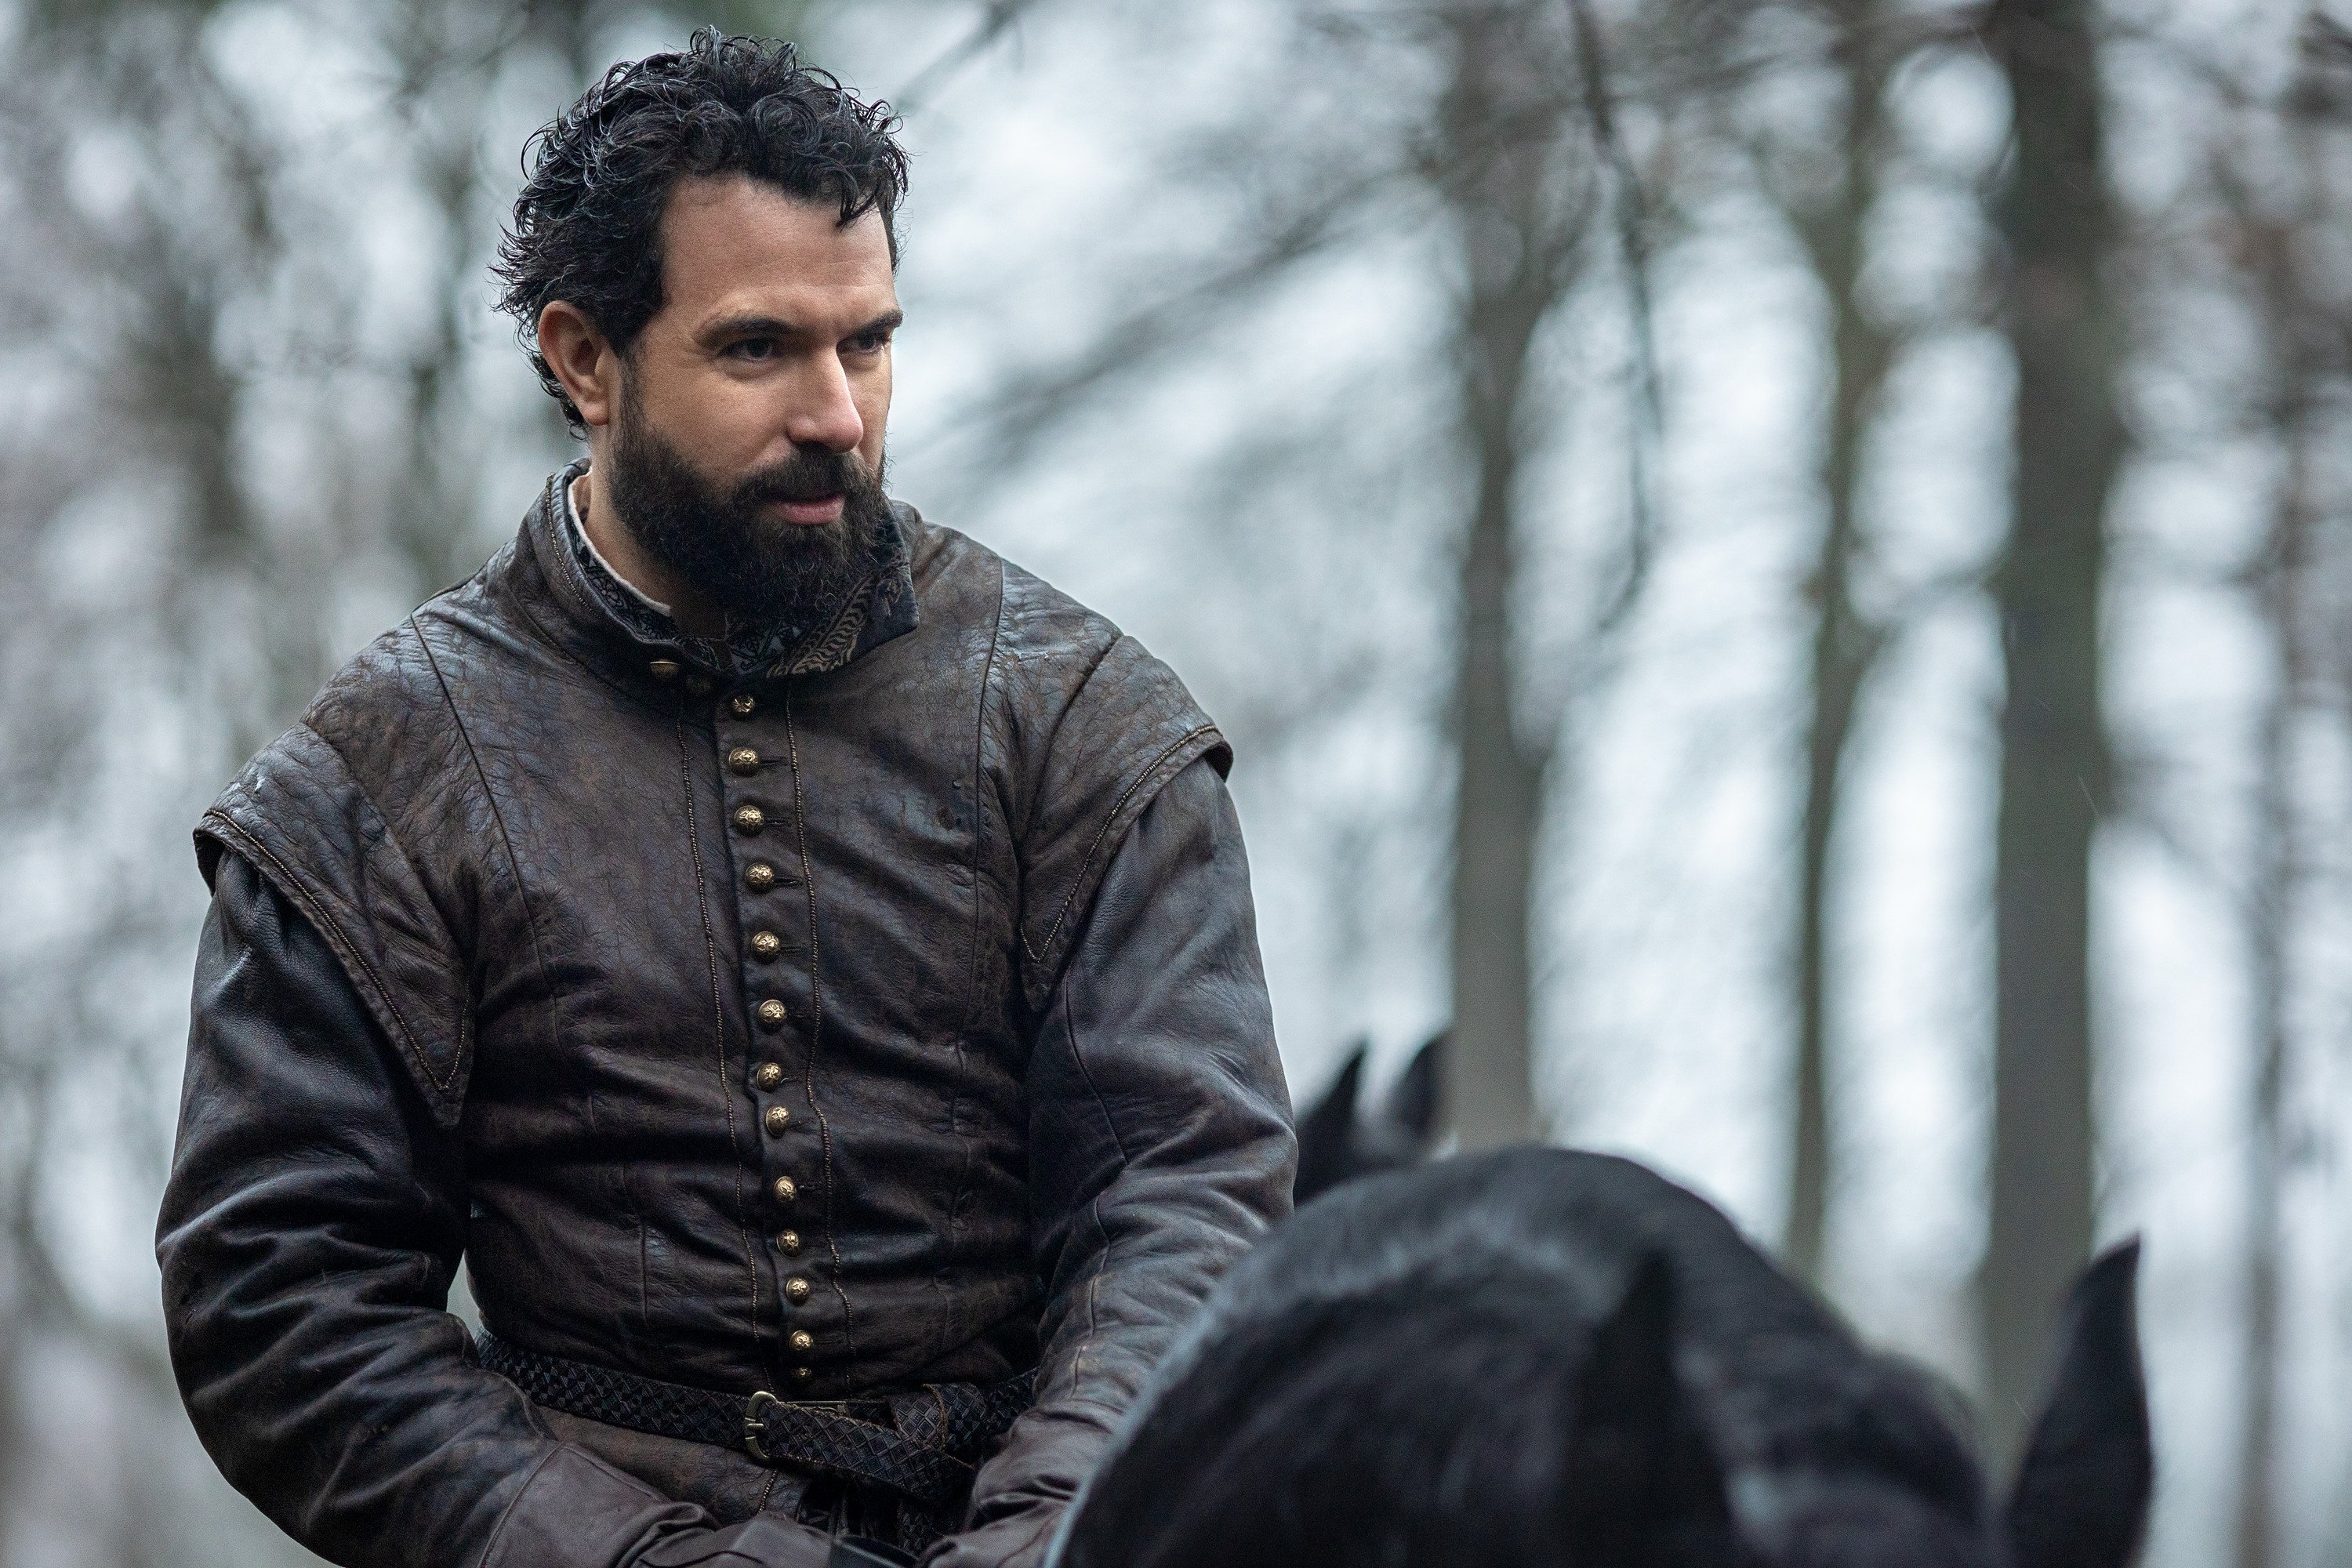 Man on a horse in the Starz series 'Becoming Elizabeth'